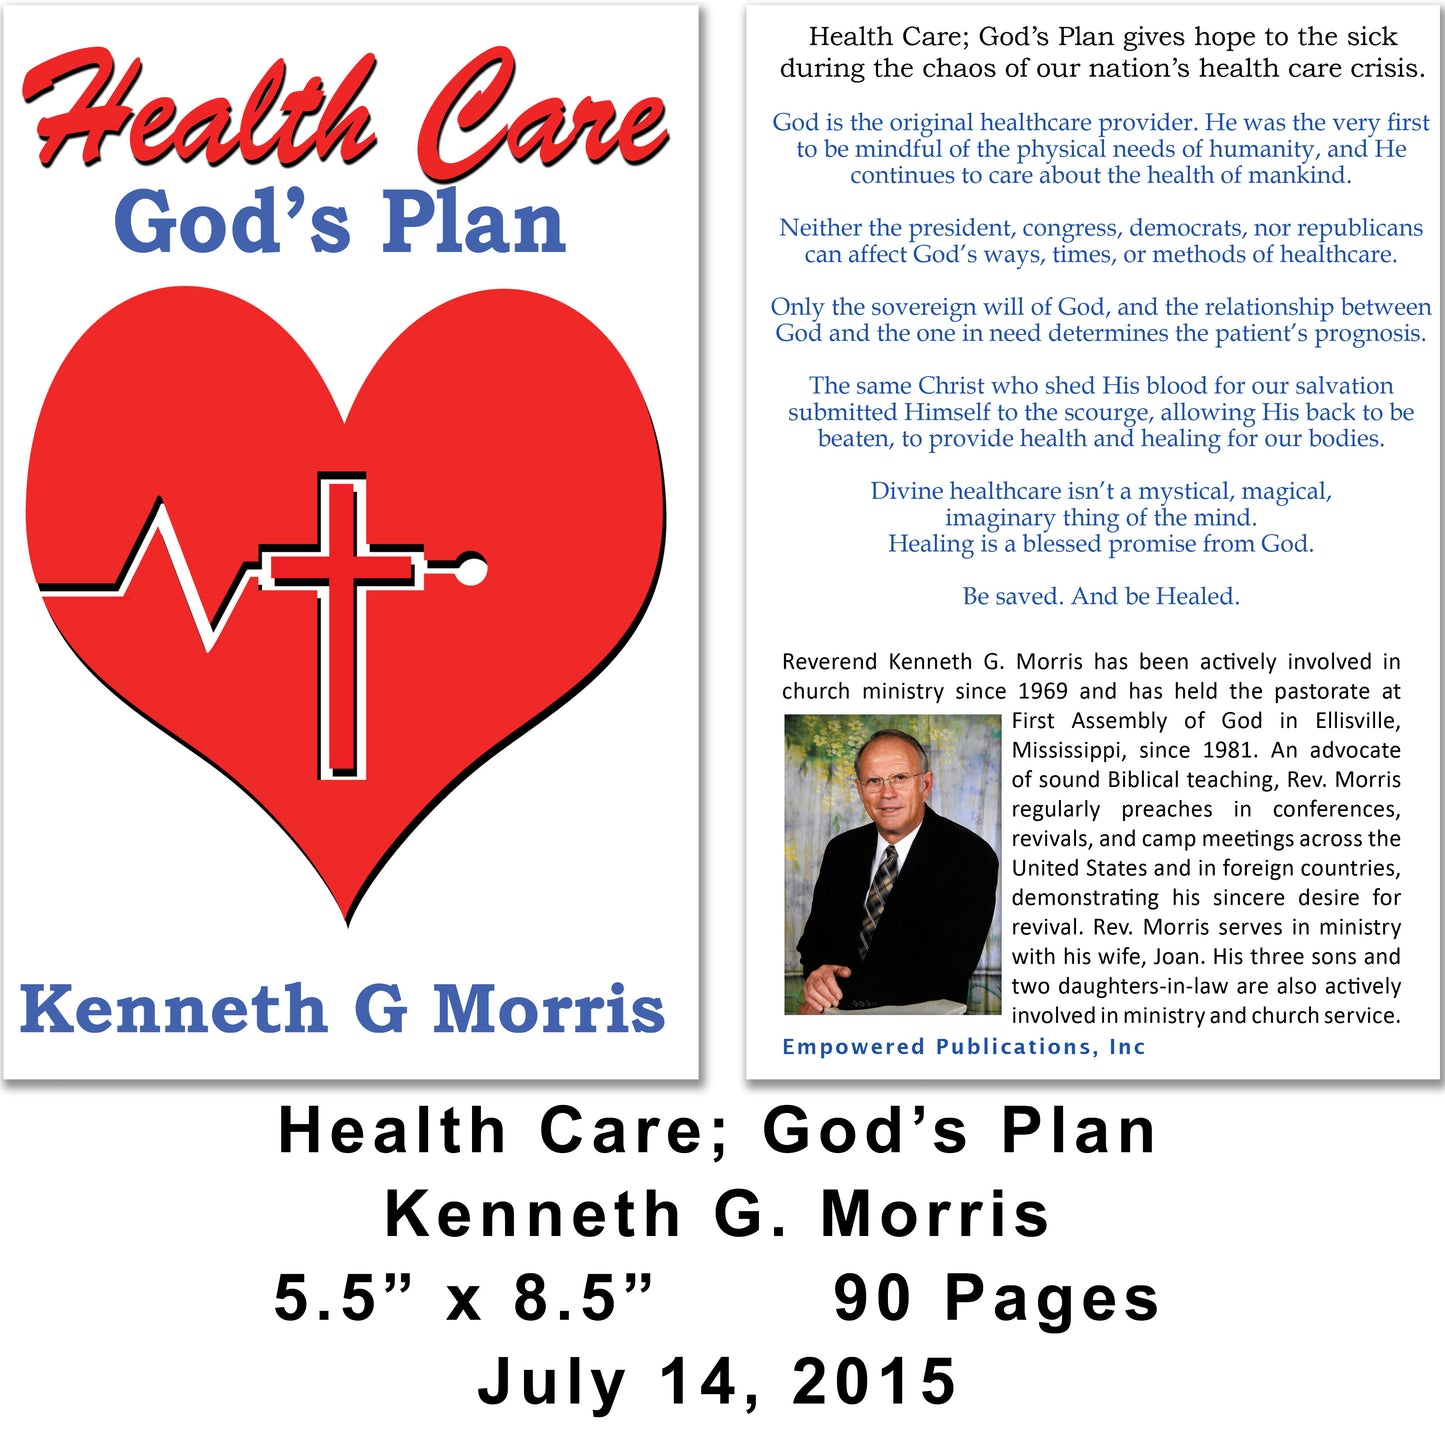 Health Care; God's Plan by Kenneth G. Morris hope to the sick during the chaos of our nation’s health care crisis.